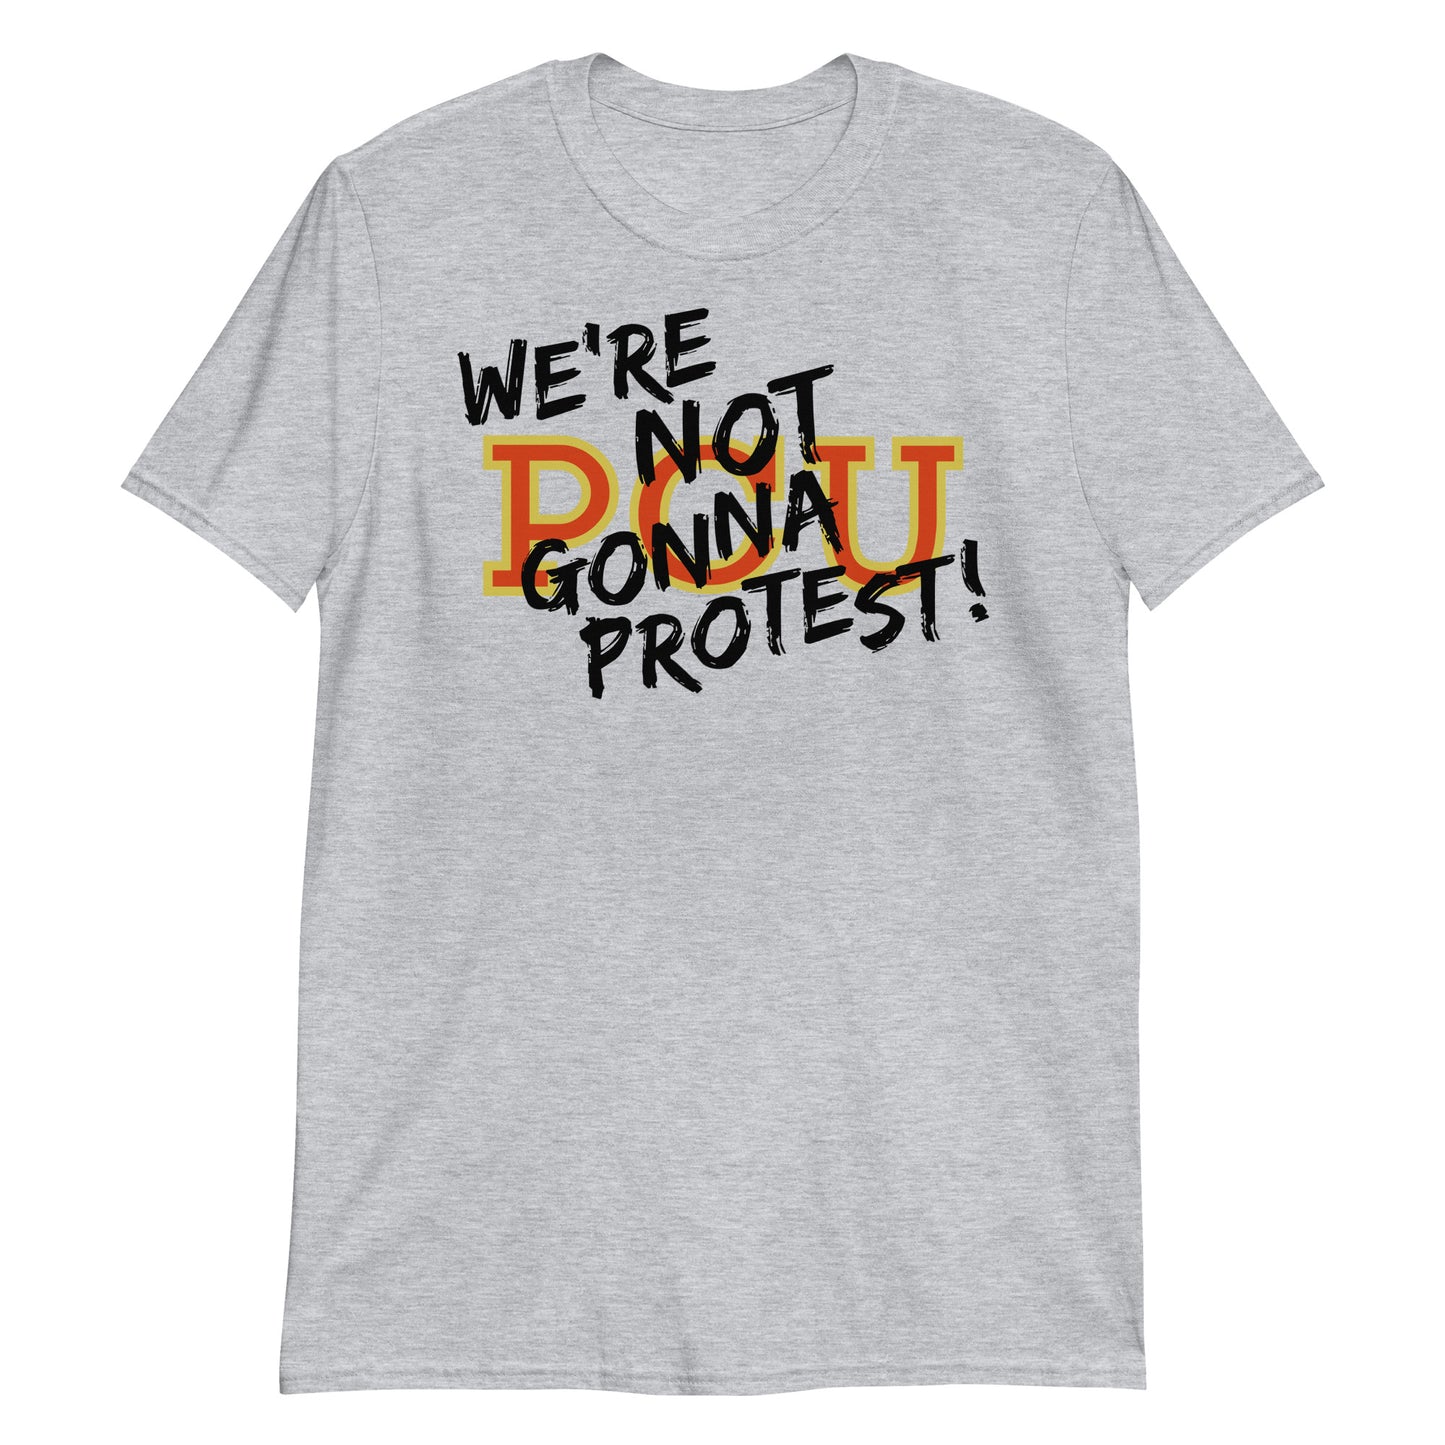 We're Not Gonna Protest! t-shirt